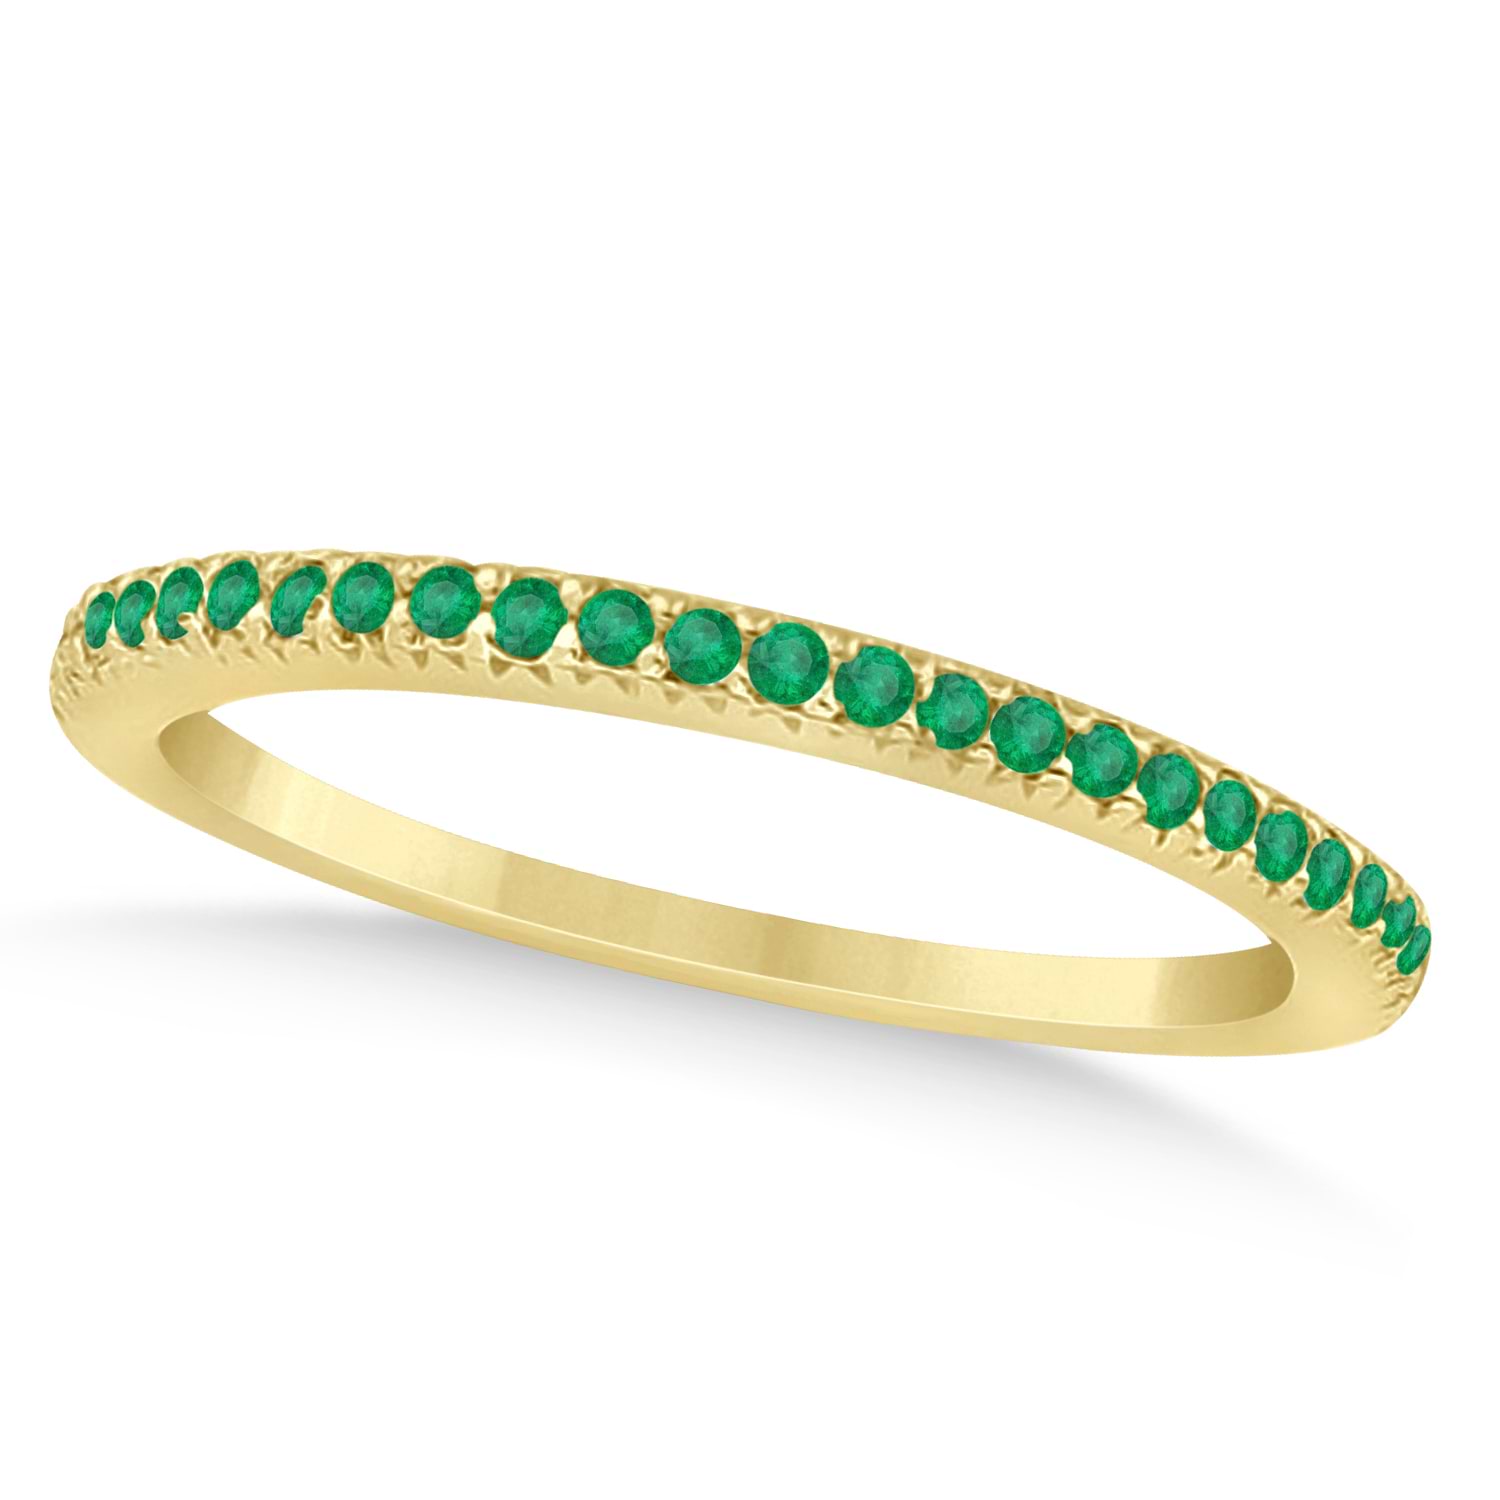 Emerald Accented Wedding Band 14k Yellow Gold 0.21ct